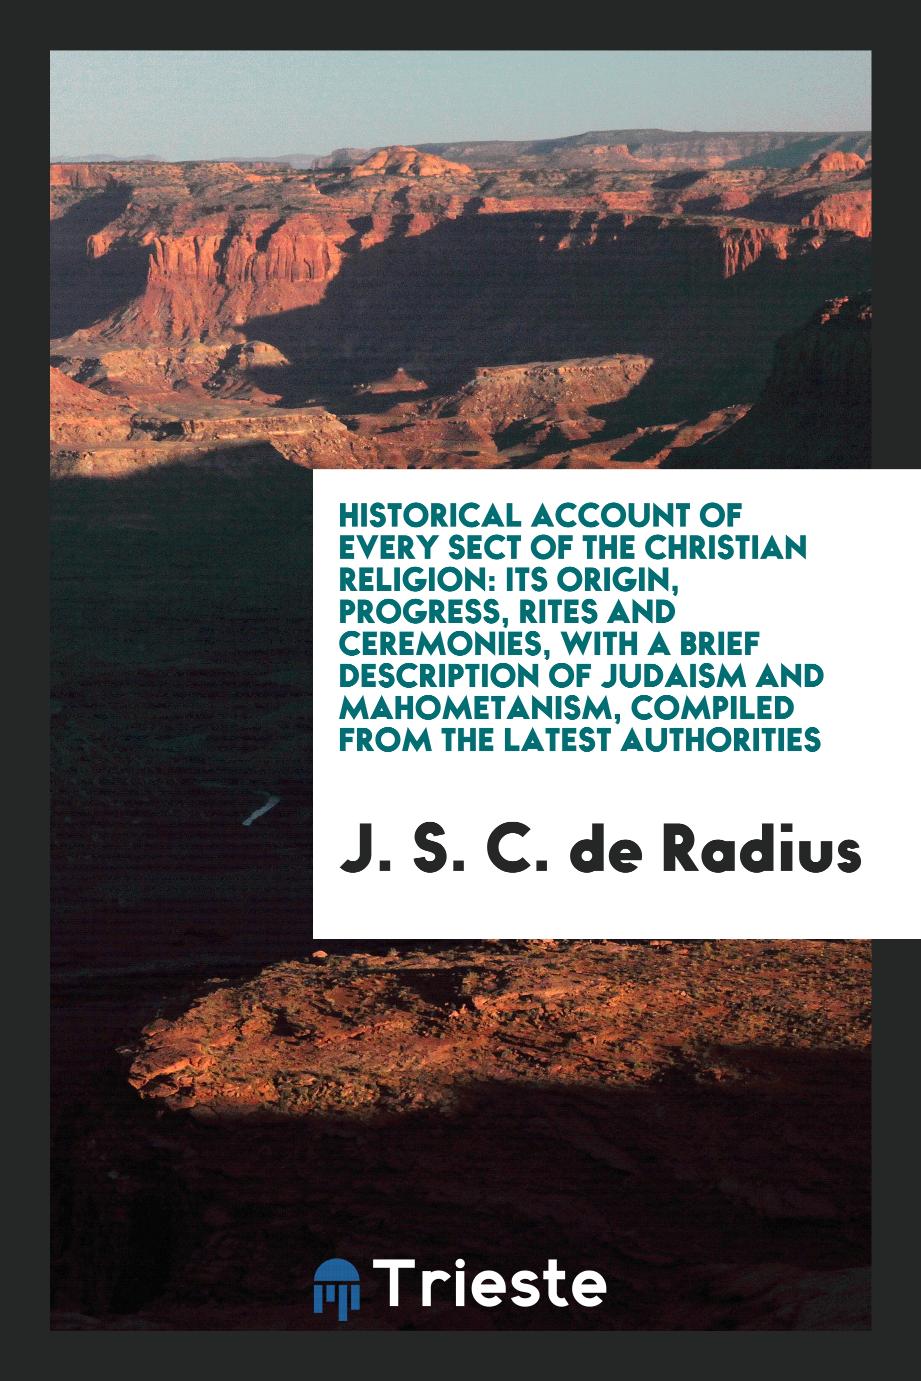 Historical Account of Every Sect of the Christian Religion: its Origin, Progress, Rites and Ceremonies, with a Brief Description of Judaism and Mahometanism, Compiled from the Latest Authorities